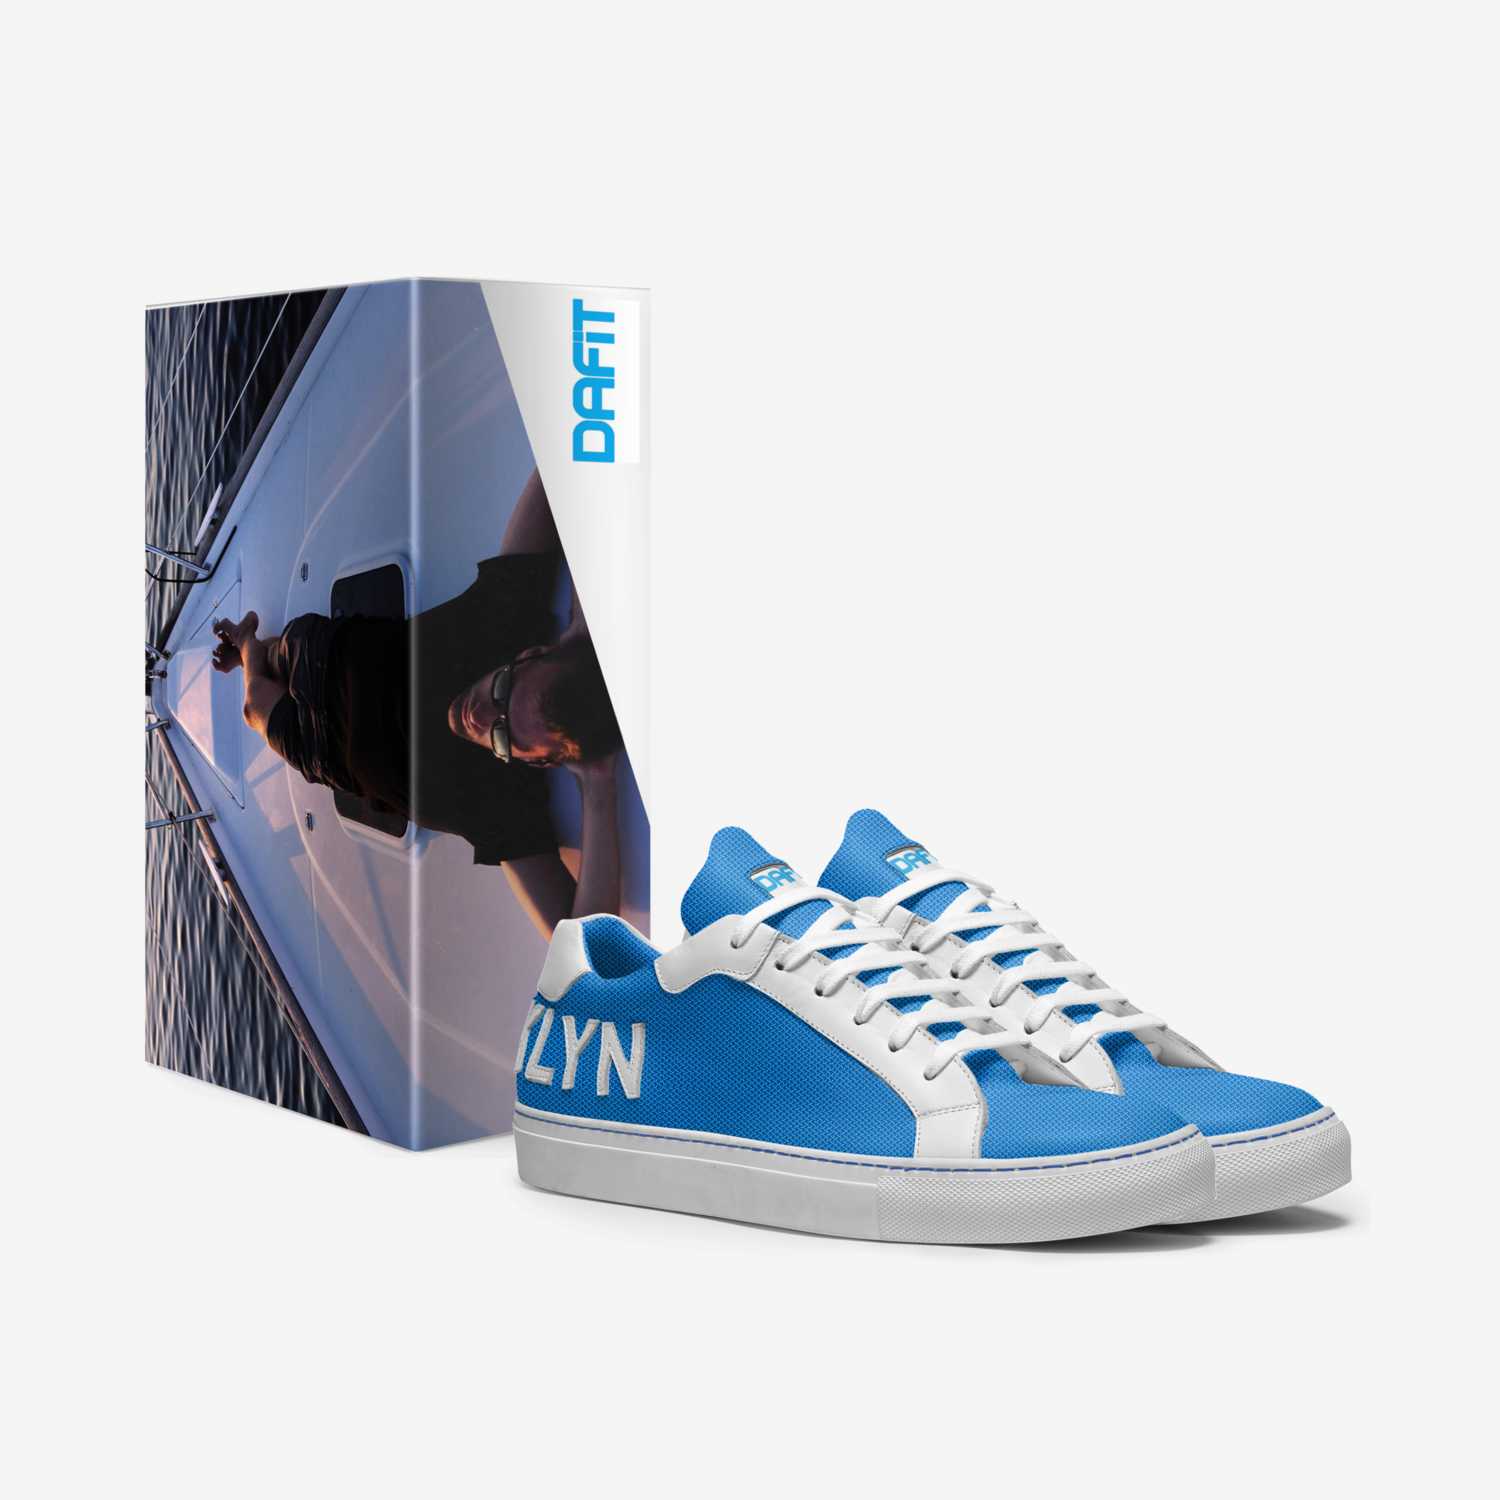 DAFIT BLEU custom made in Italy shoes by Michael Brownlee | Box view